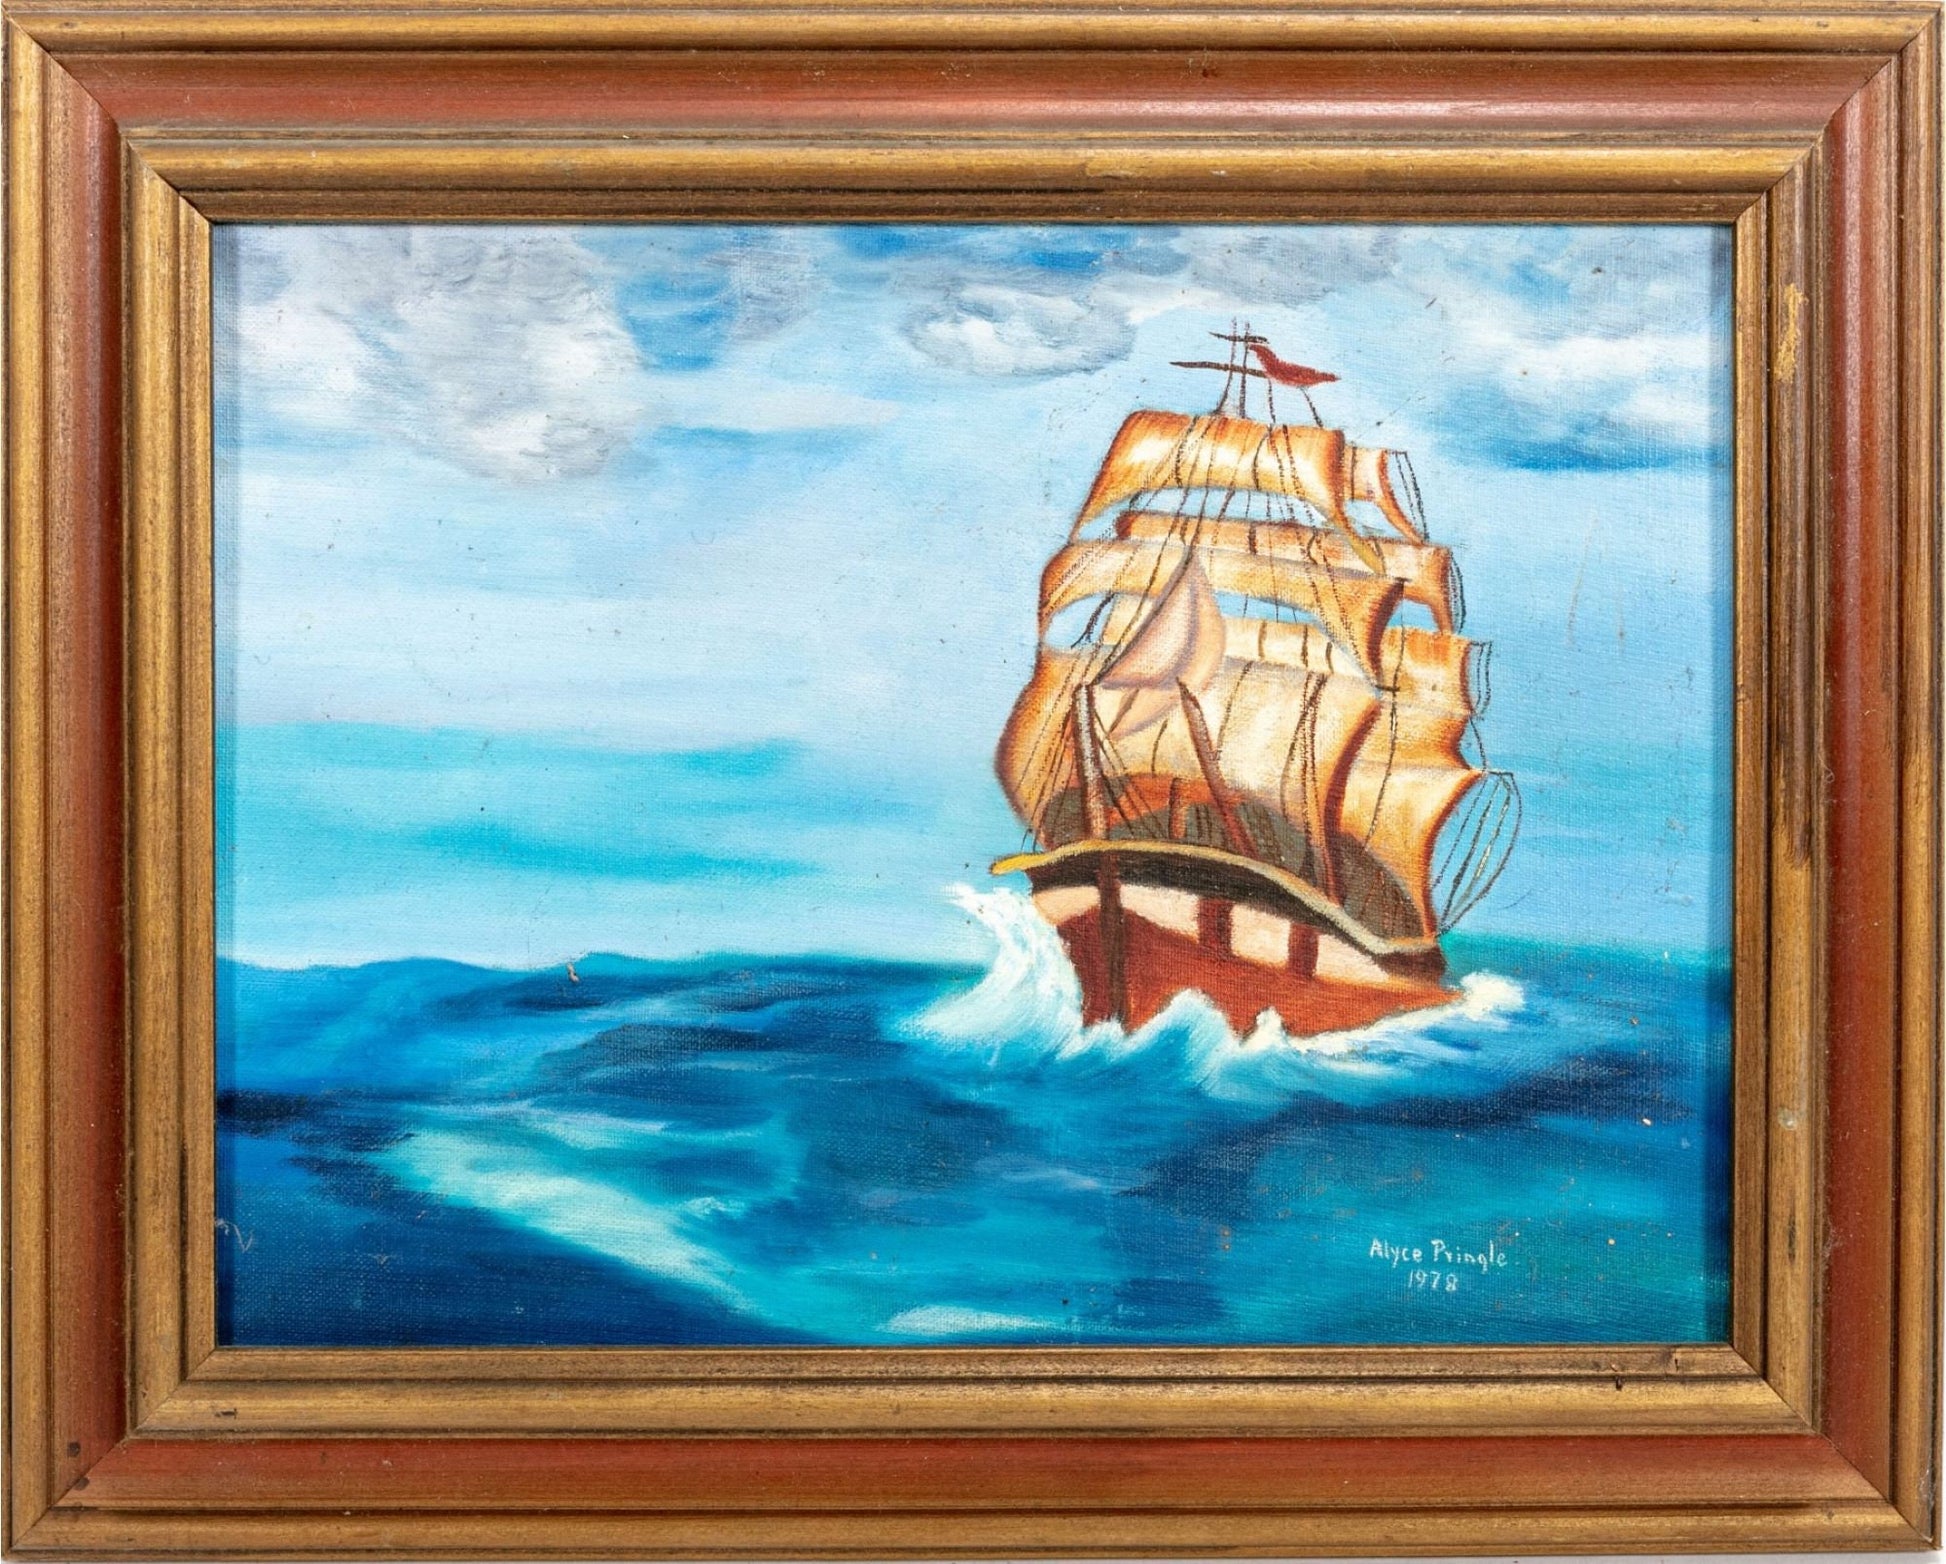 Acrylic on canvas board painting of a ship signed Alyce Pringle